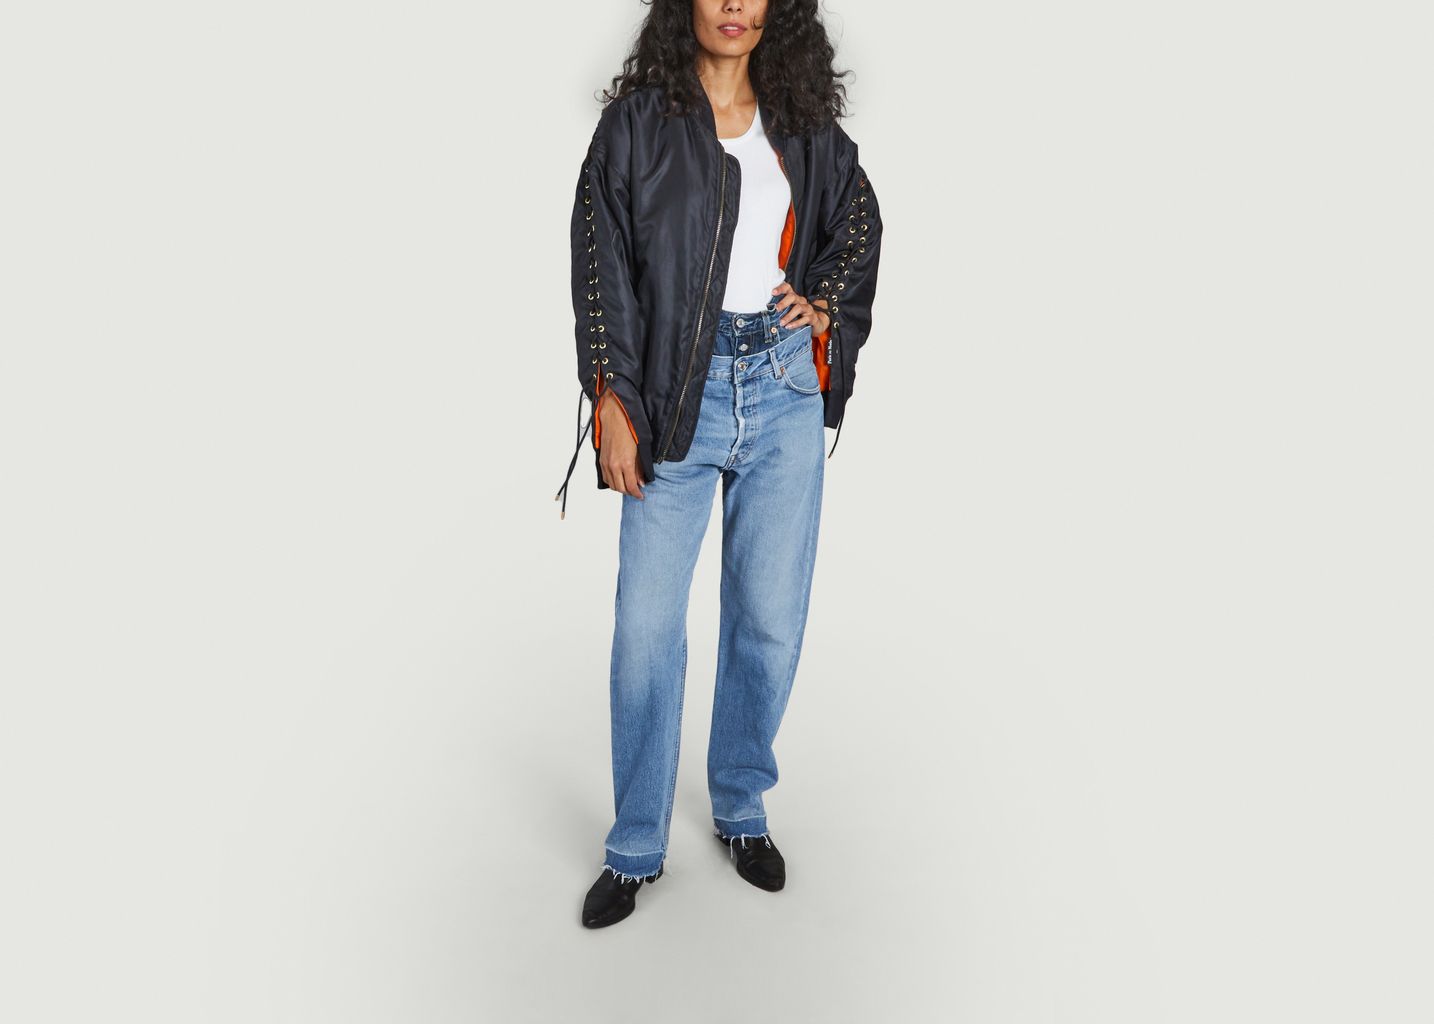 Levi's Jeans mit doppelter Taille - Paris RE Made